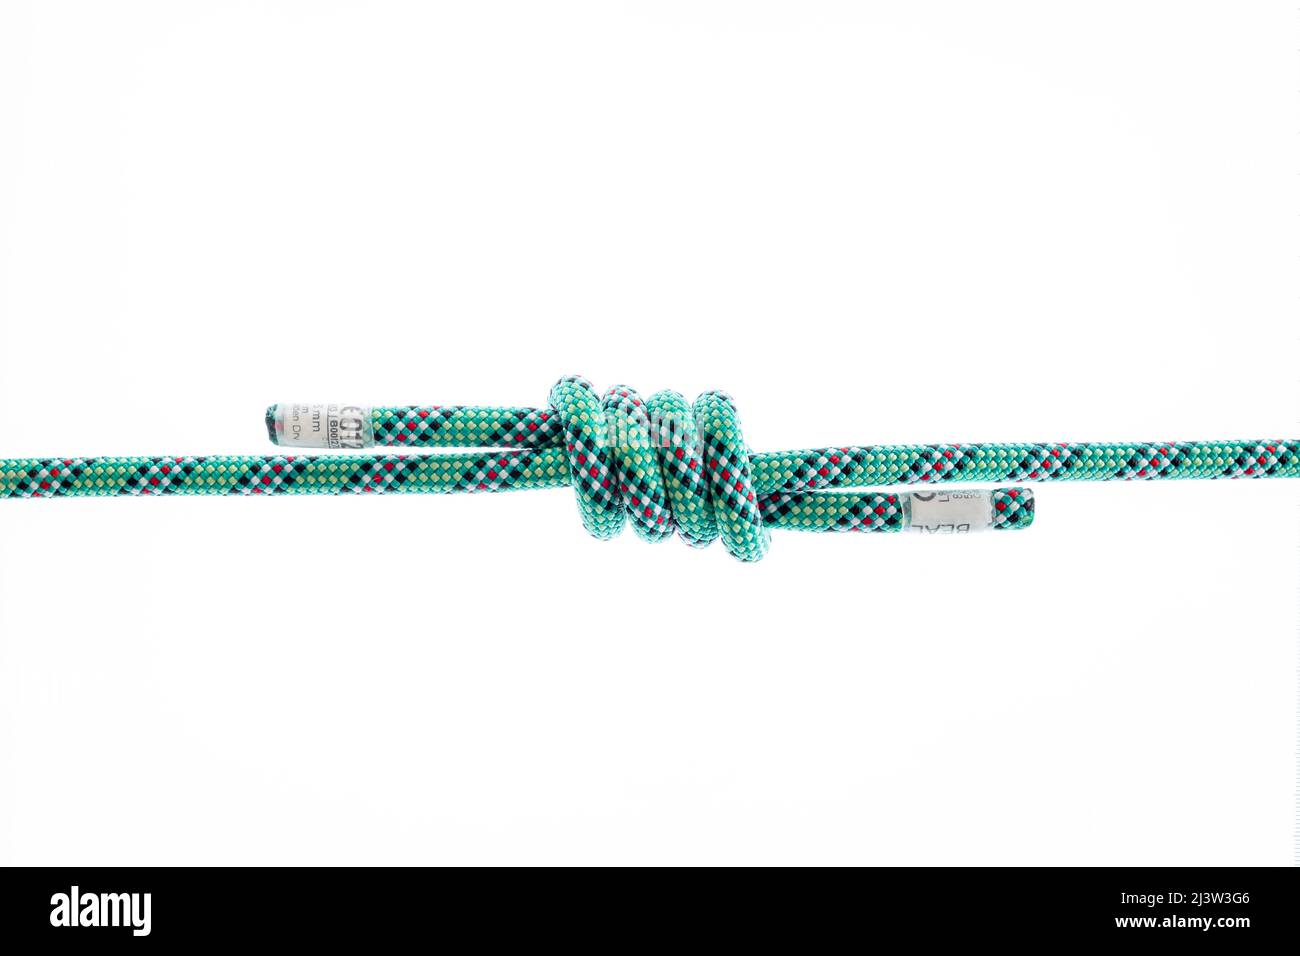 Double fisherman's knot to overlap the two ends of the rope Stock Photo